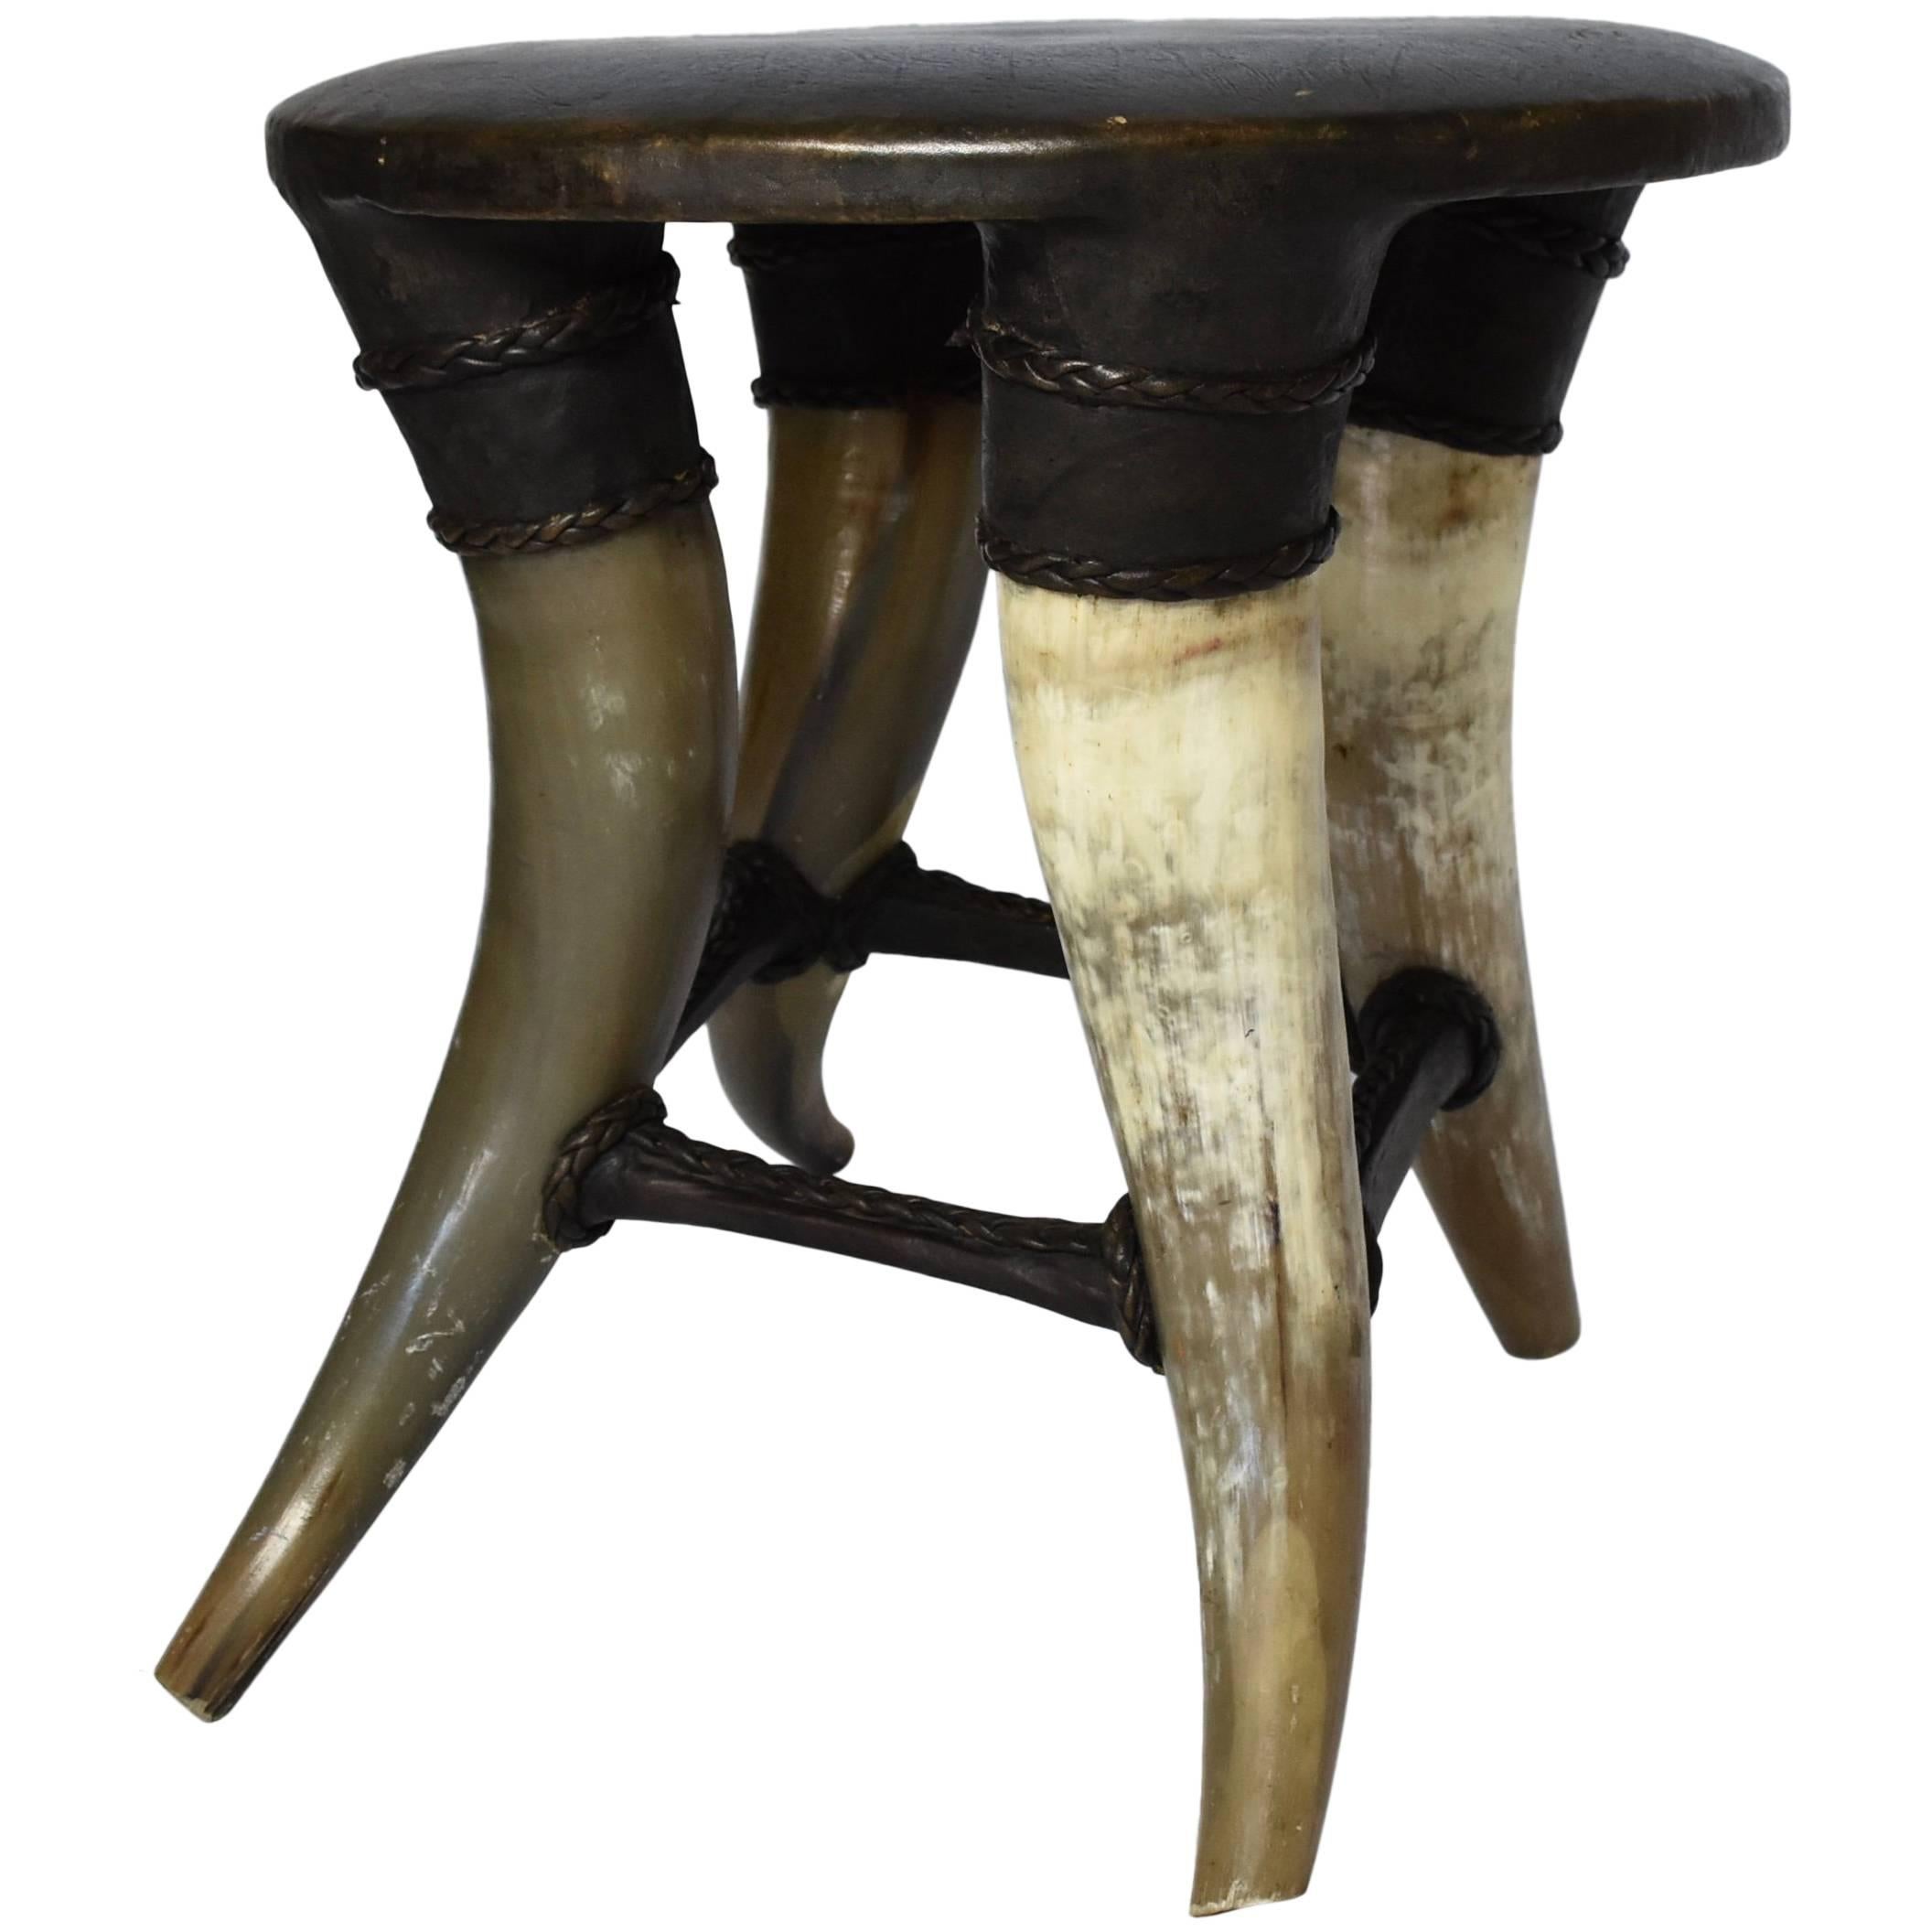 Vintage African Horn Stool with Chocolate Brown Leather Upholstery